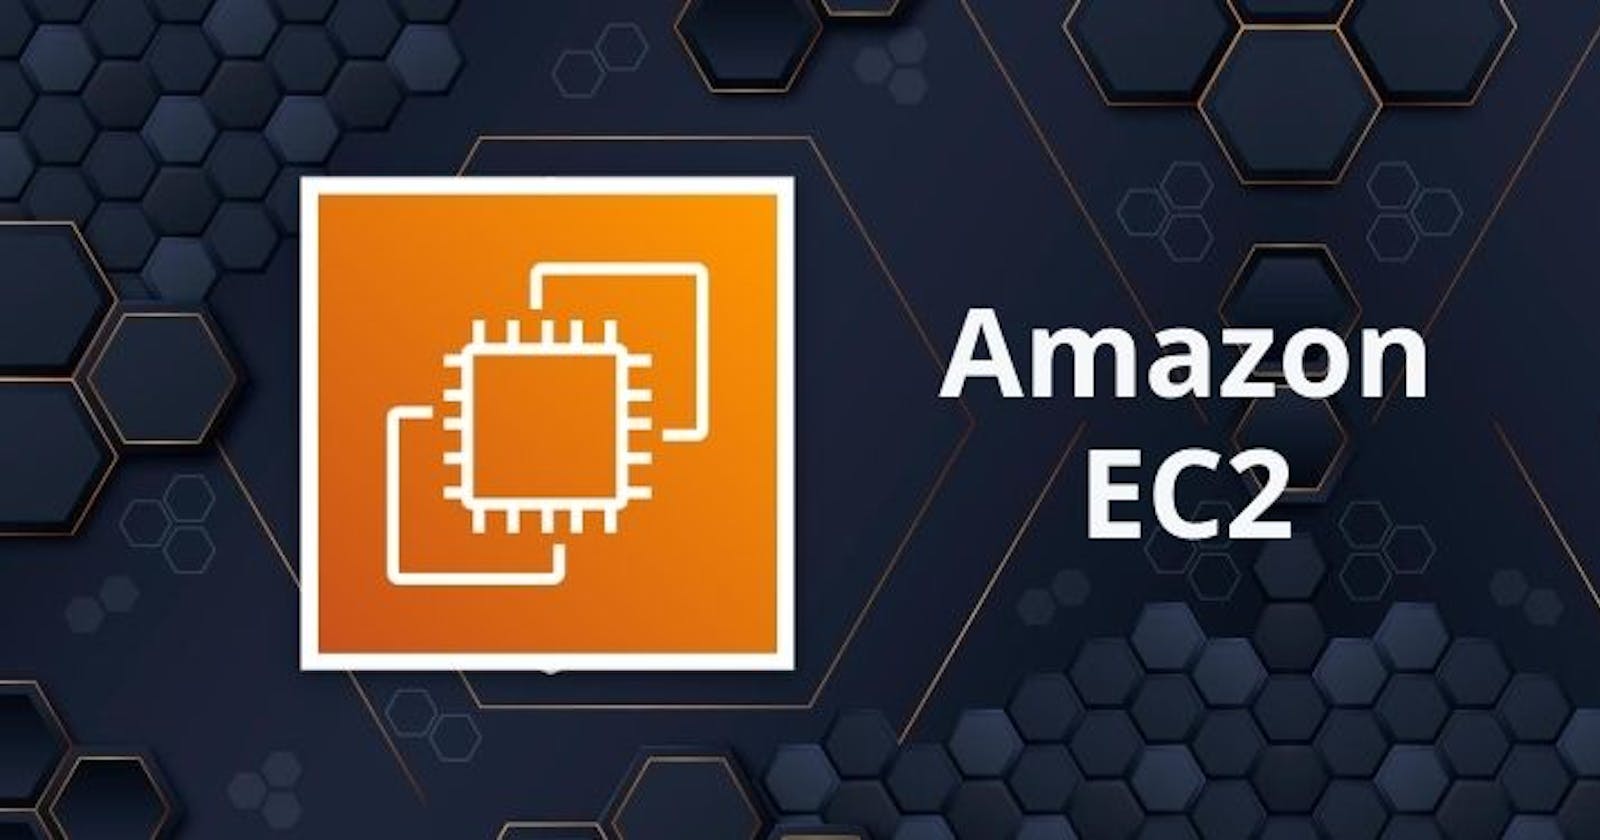 Step-by-Step Guide to Deploying an EC2 Instance on AWS and Connecting it to Your Computer